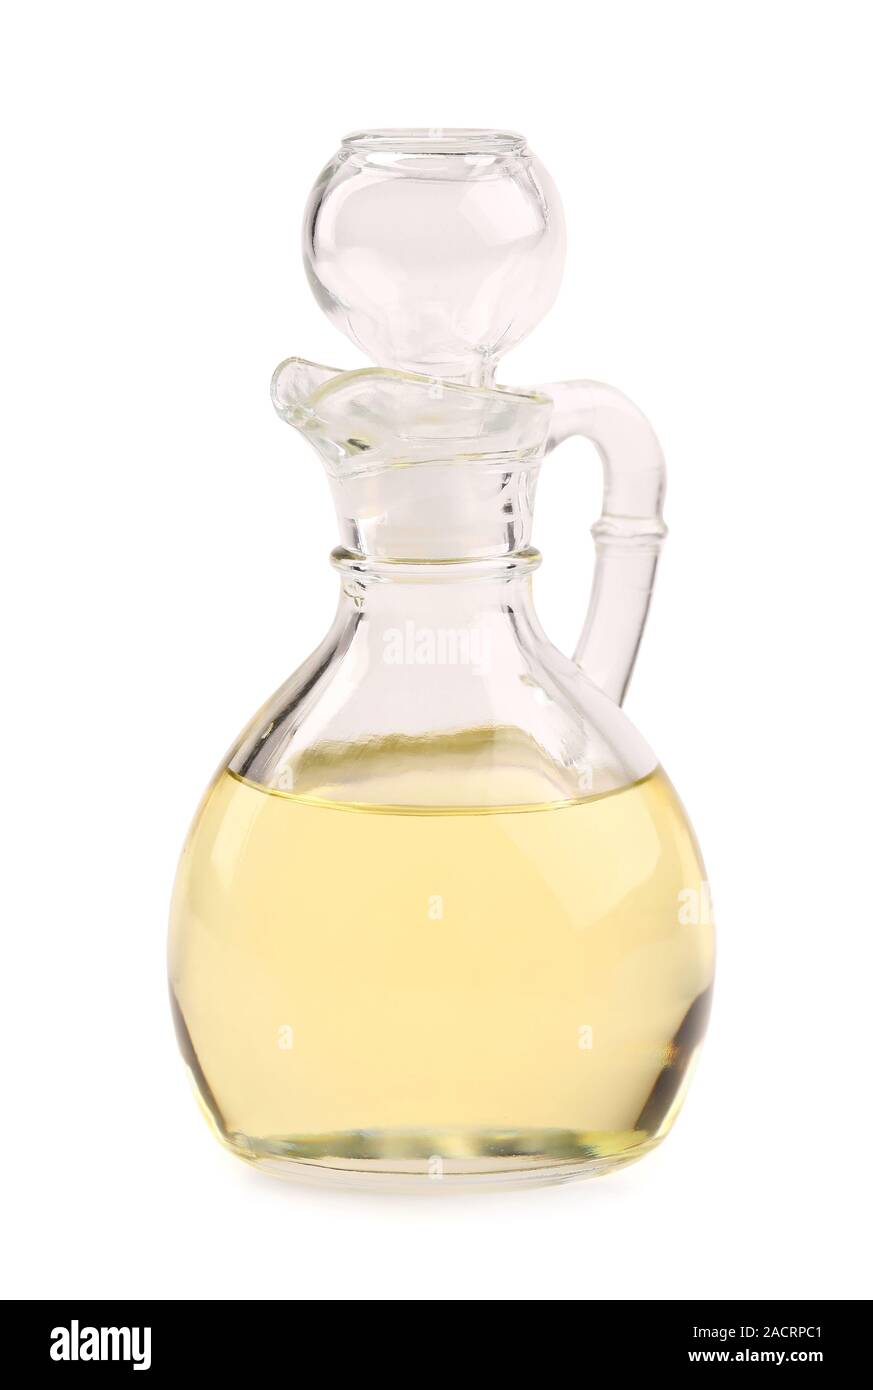 olive oil carafe closed Stock Photo